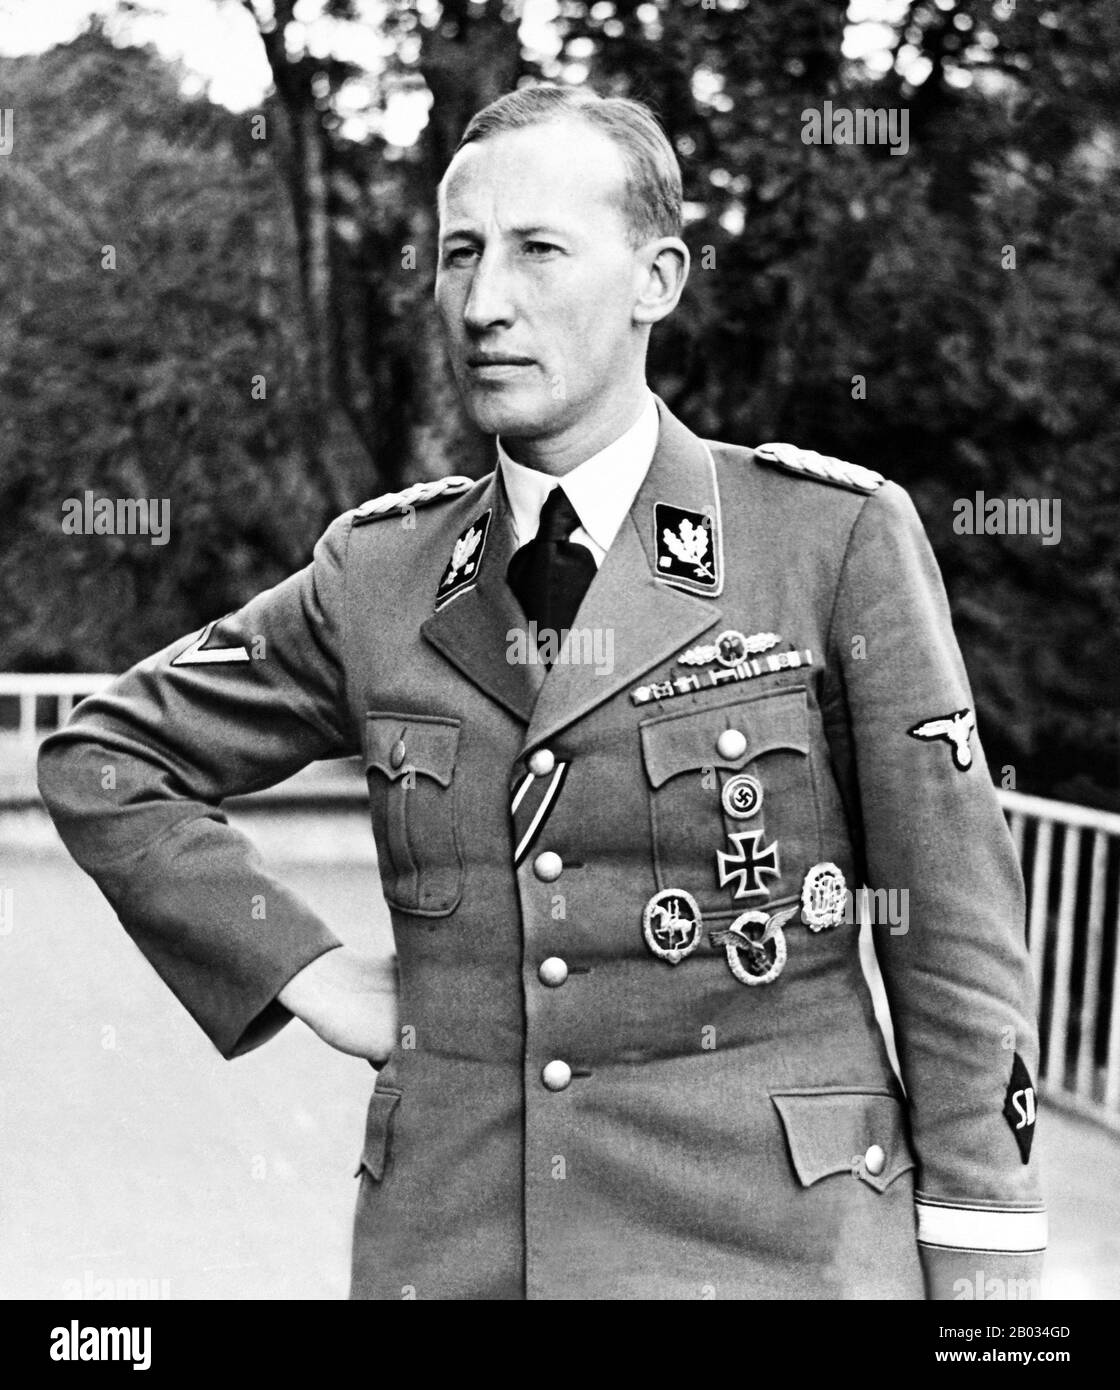 Reinhard Tristan Eugen Heydrich (7 March 1904 – 4 June 1942) was a high-ranking German Nazi official during World War II, and one of the main architects of the Holocaust. He was SS-Obergruppenführer und General der Polizei (Senior Group Leader and Chief of Police) as well as chief of the Reich Main Security Office (including the Gestapo, Kripo, and SD).  He was also Stellvertretender Reichsprotektor (Deputy/Acting Reich-Protector) of Bohemia and Moravia, in what is now the Czech Republic. Heydrich chaired the January 1942 Wannsee Conference, which formalised plans for the Final Solution to the Stock Photo